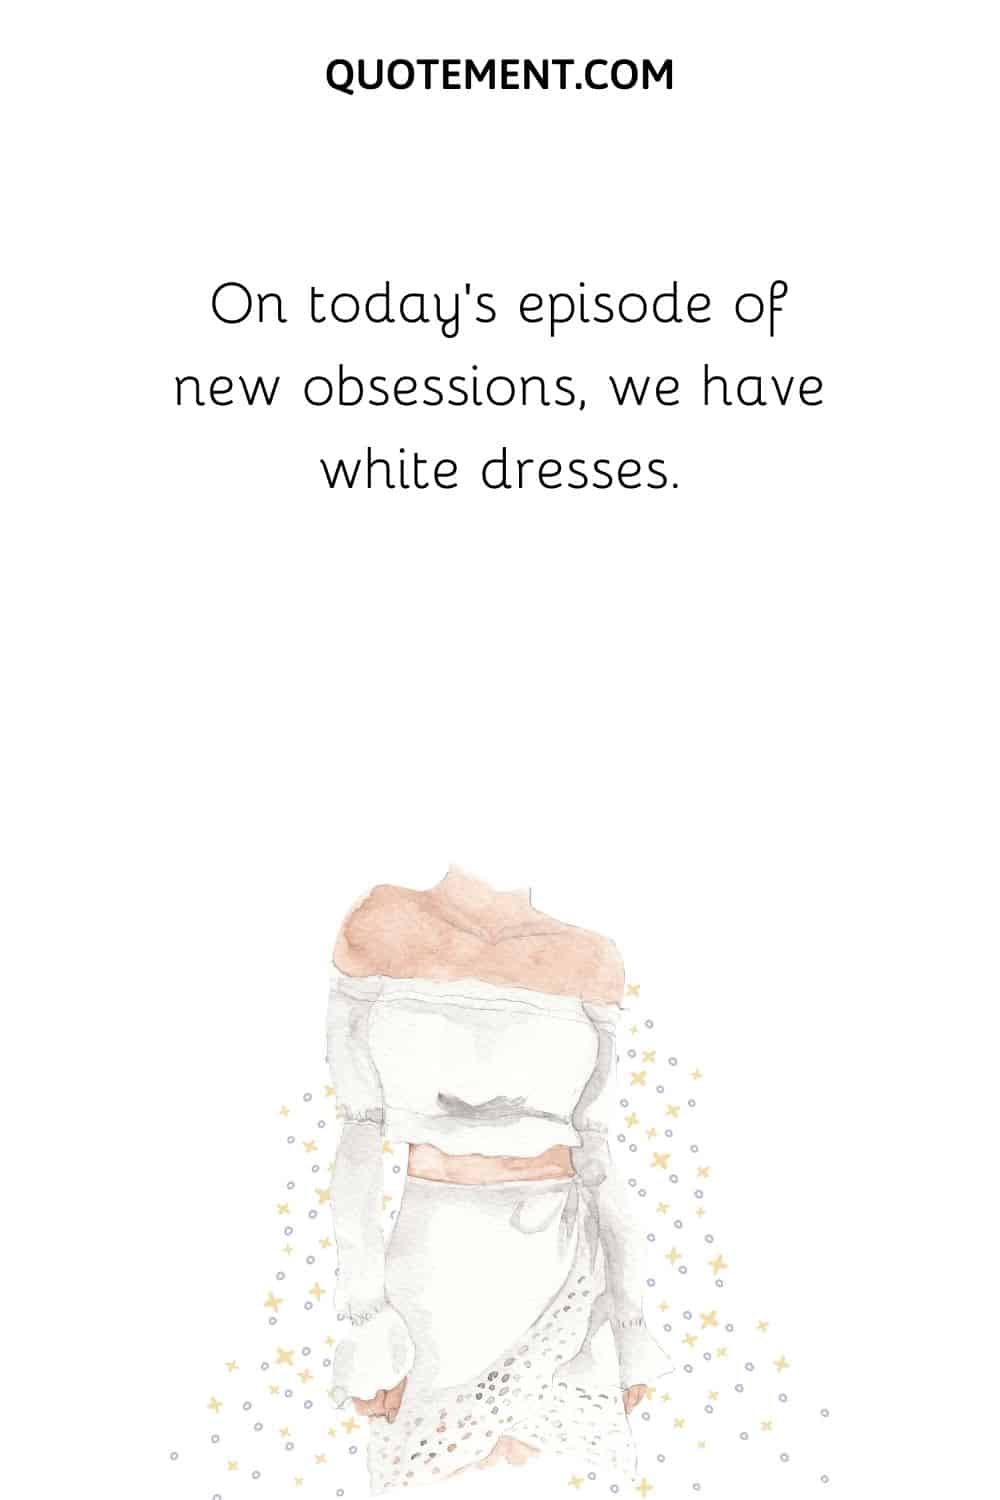 On today’s episode of new obsessions, we have white dresses.